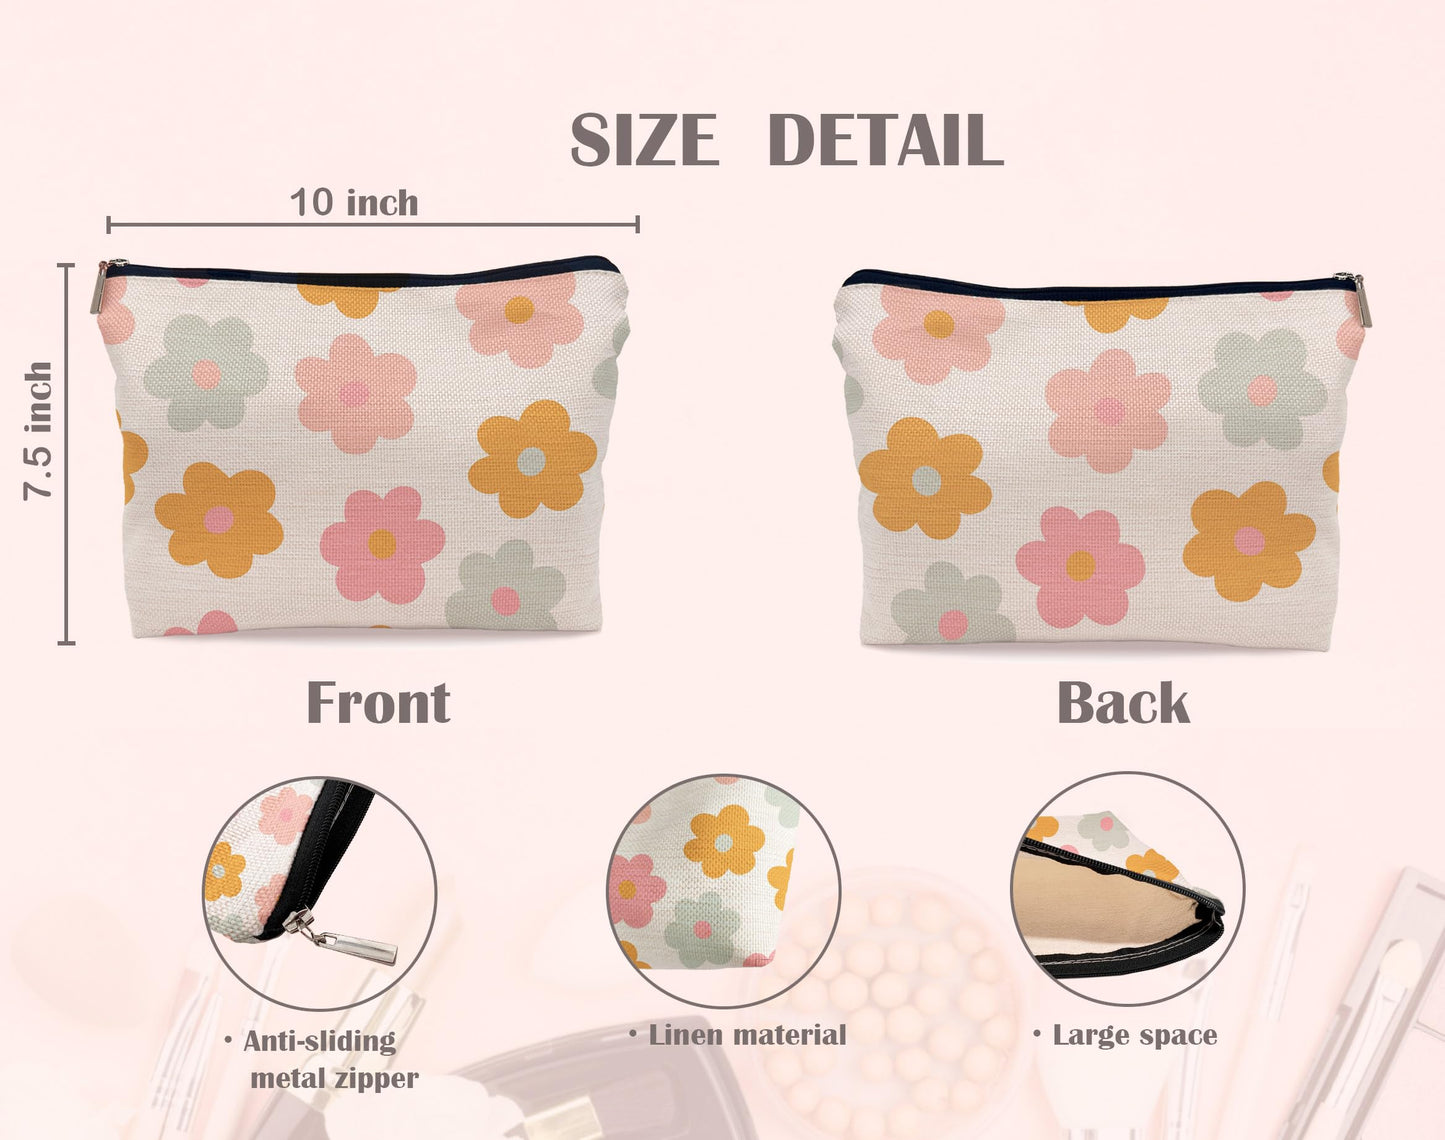 Lacosu Retro Groovy 60s 70s Daisy Flowers Makeup Bag Cosmetic Bag Zipper Pouch Toiletry Bags,Groovy Gifts for Women Teen Girls Her